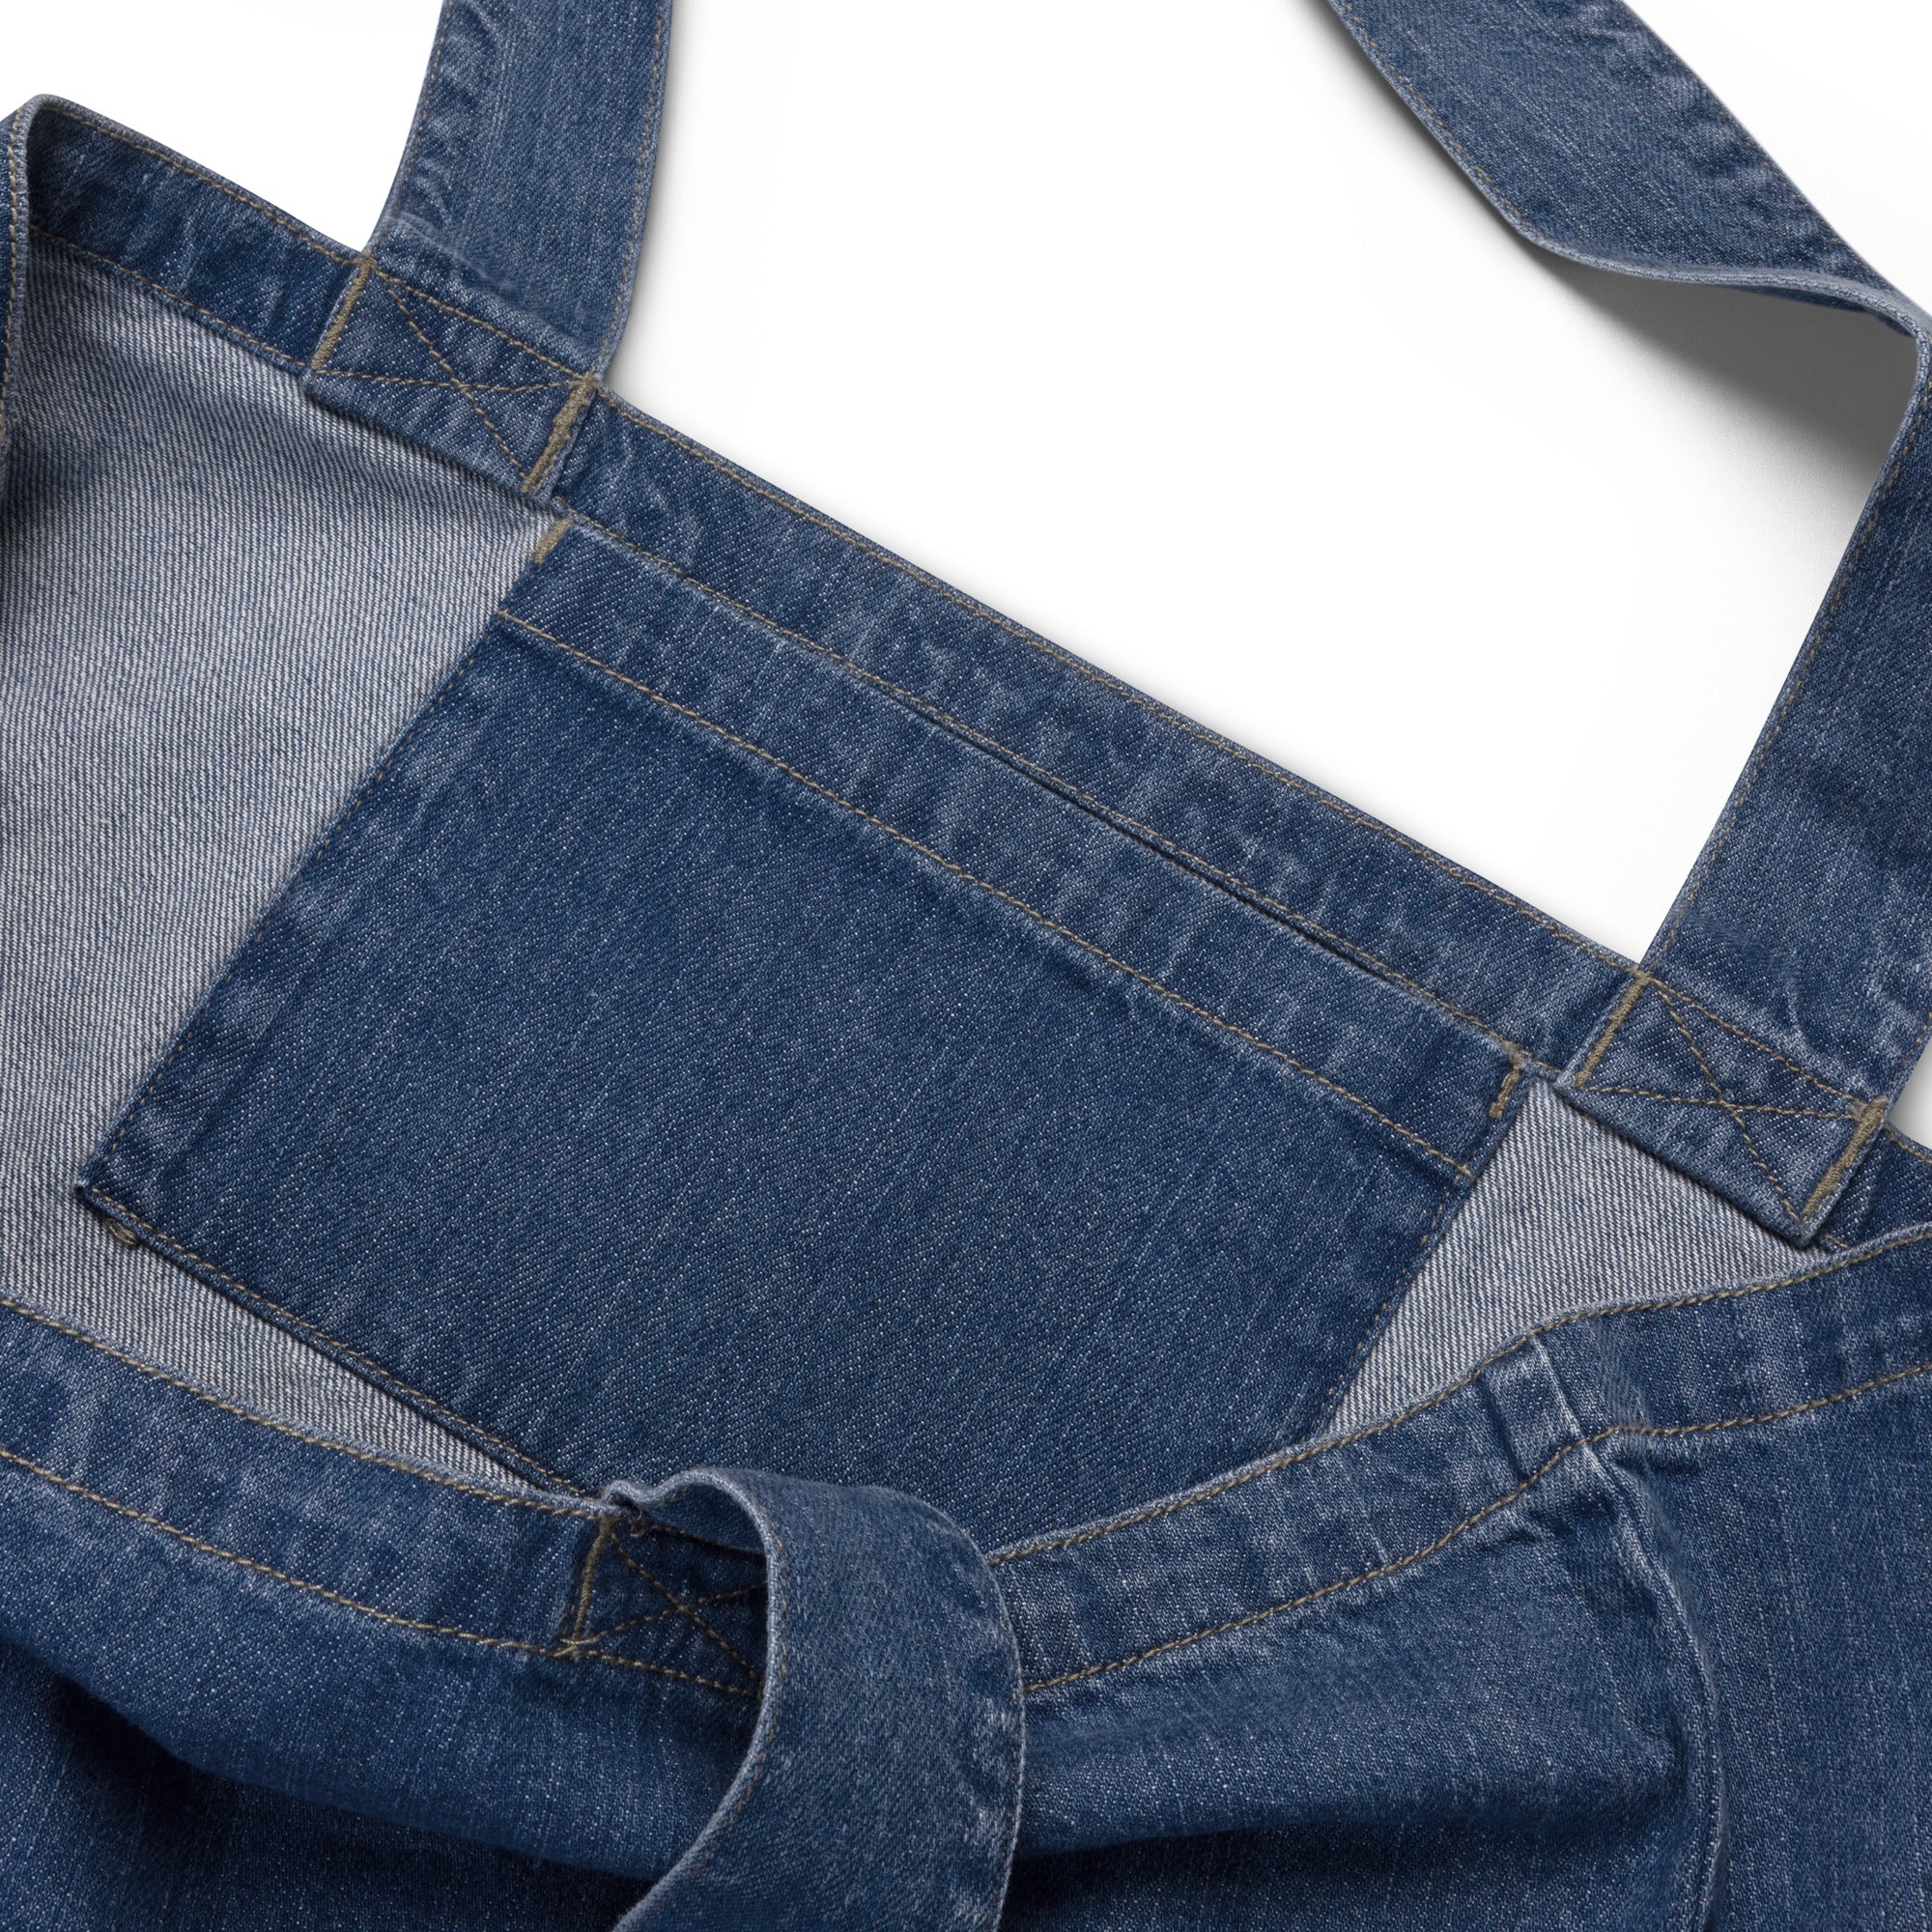 Bowie (famous doll font) Printed Organic denim tote bag